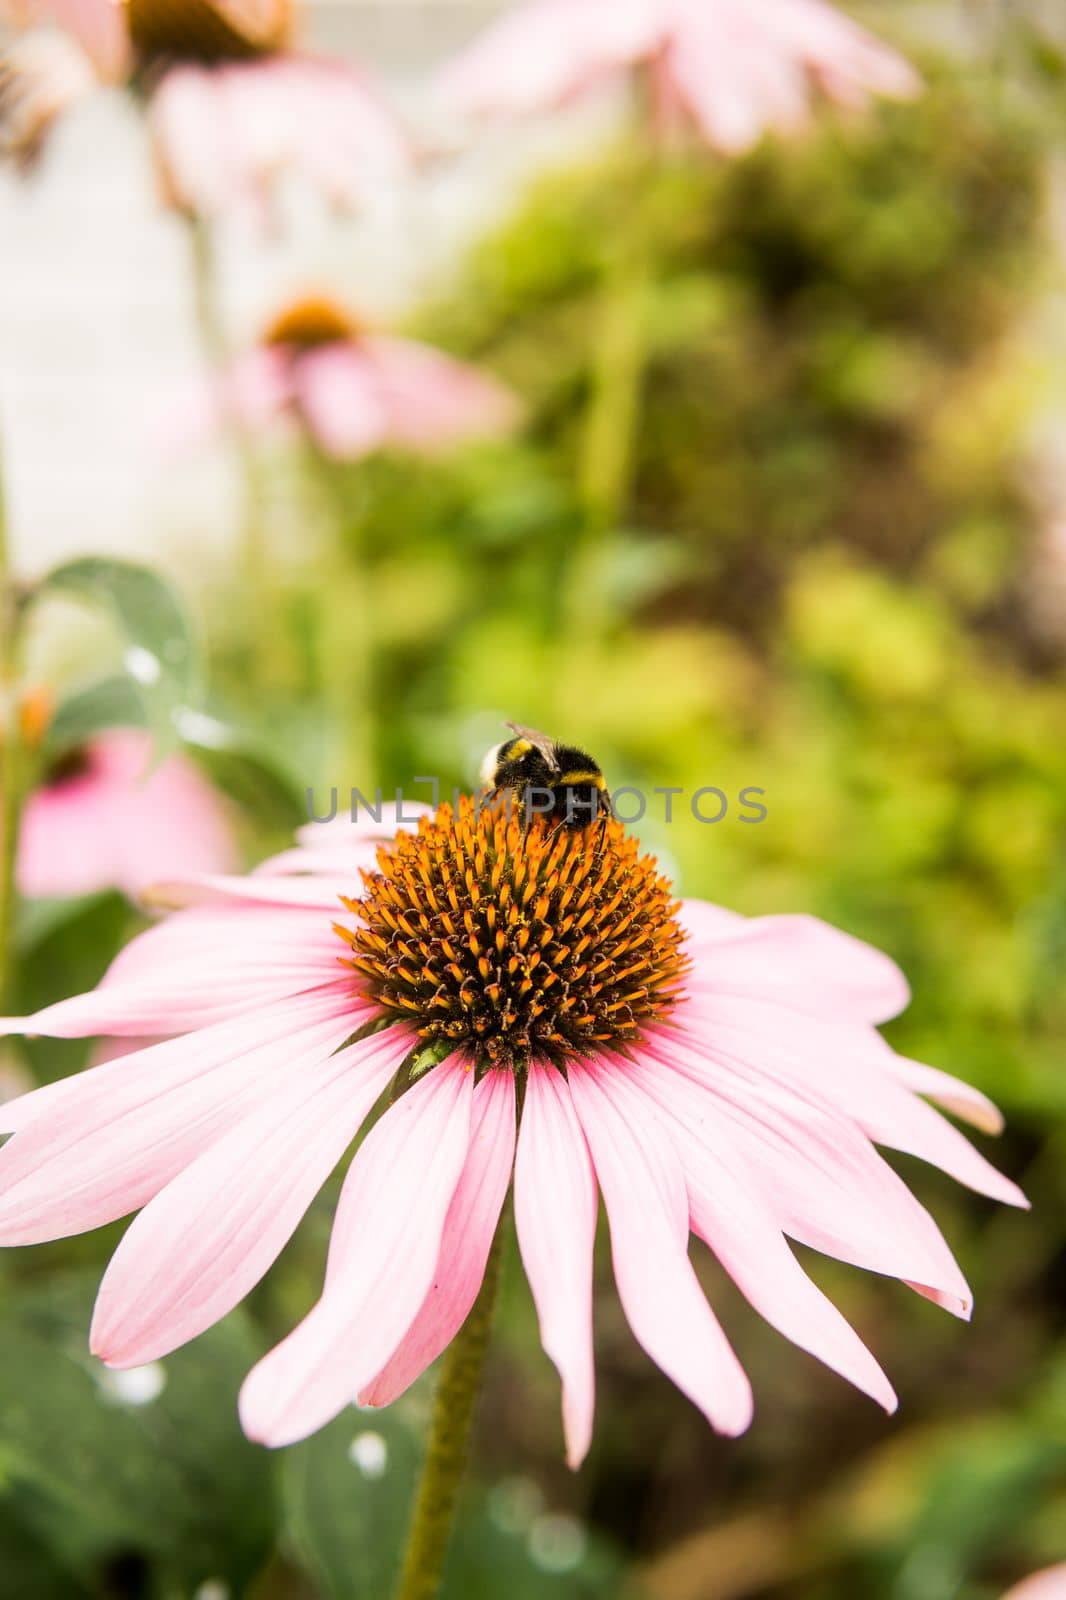 Beautiful daisies growing in the garden. Gardening concept, close-up. The flower is pollinated by a bumblebee